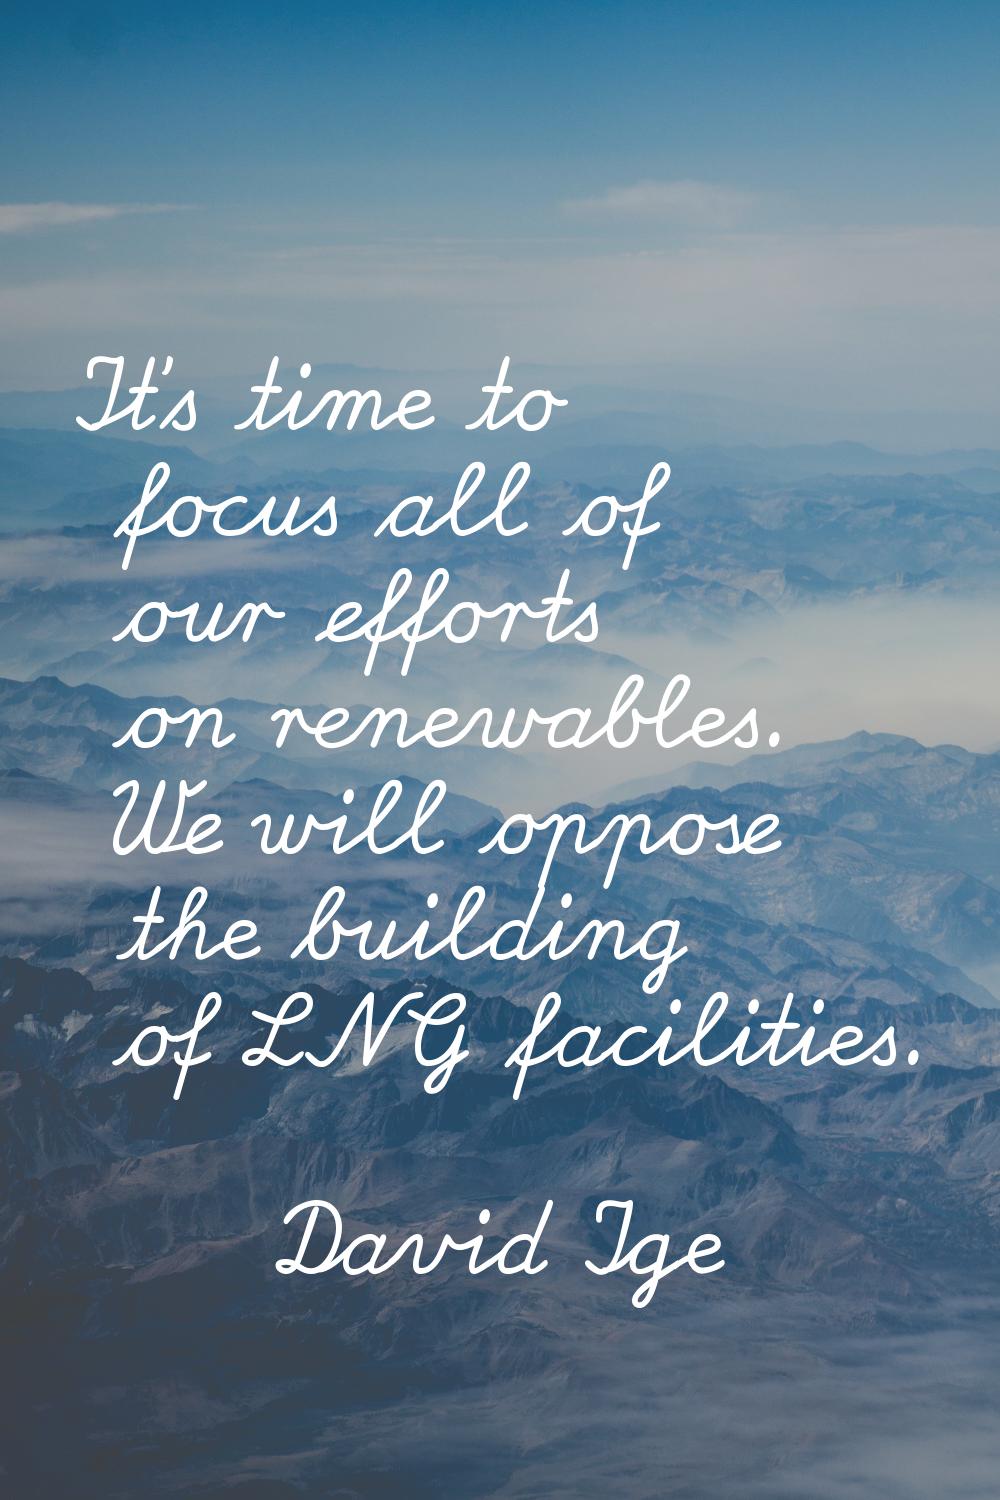 It's time to focus all of our efforts on renewables. We will oppose the building of LNG facilities.